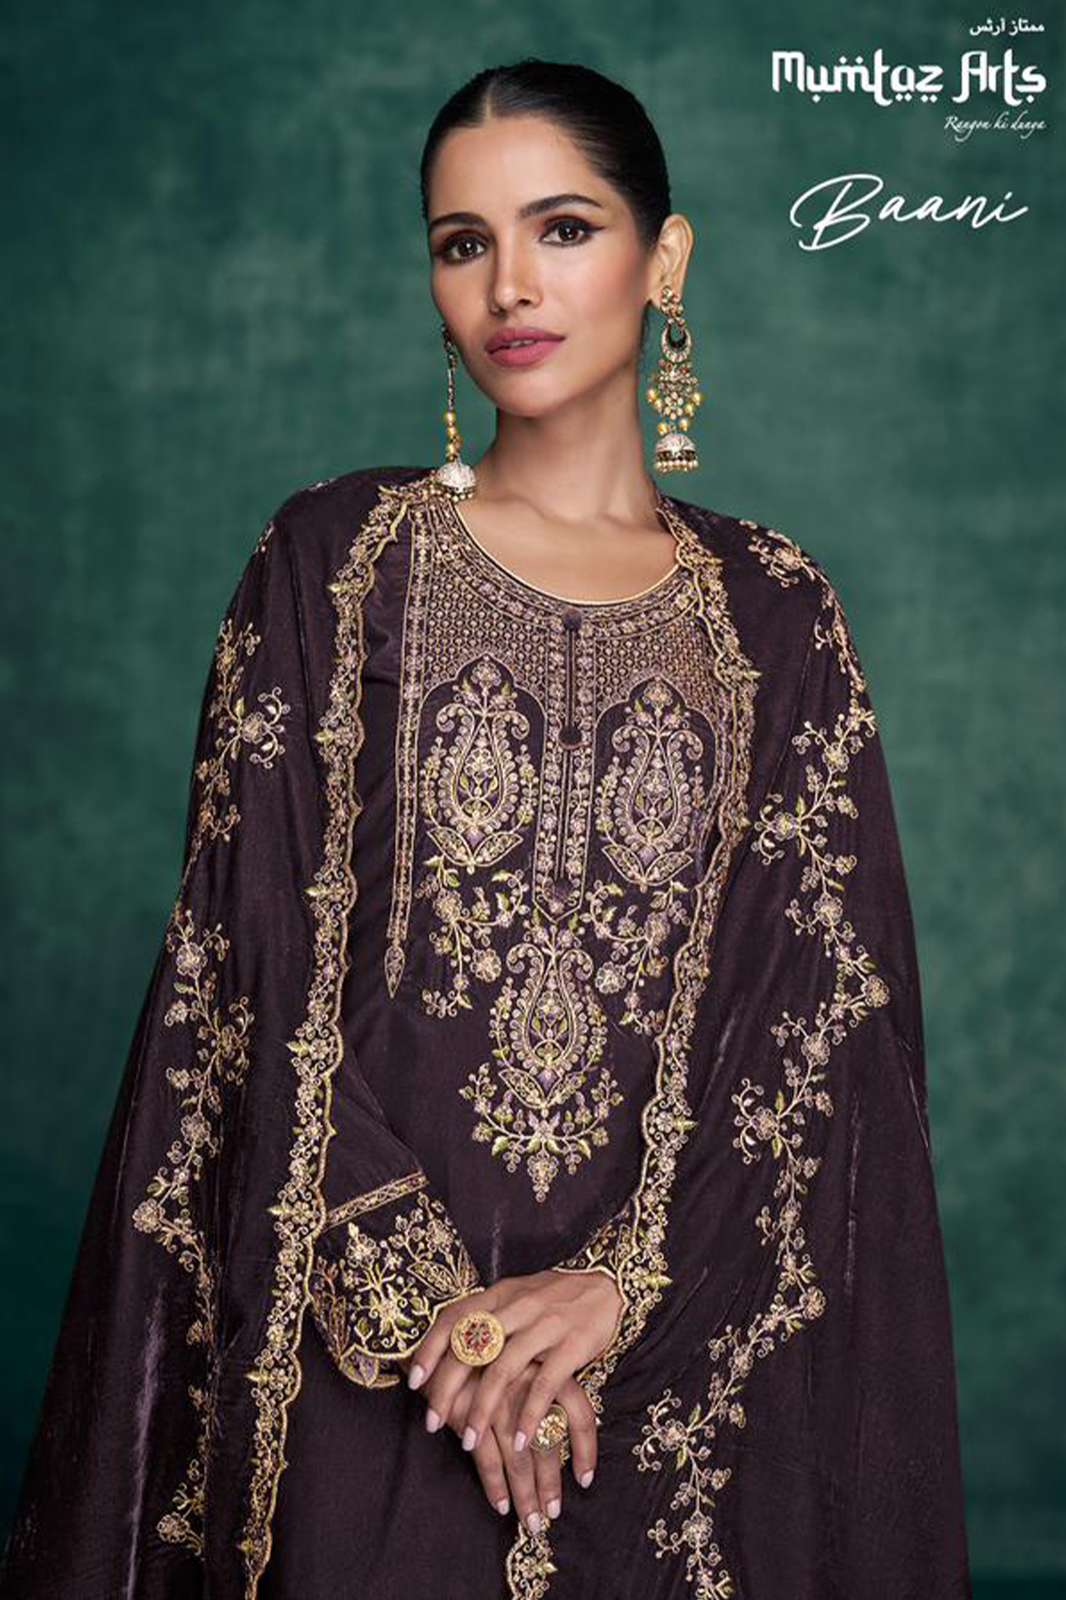 MUMTAZ ARTS BAANI PURE VELVET WITH HEAVY EMBROIDERY NECK DAMAN SLEEVES WITH CUTWORK